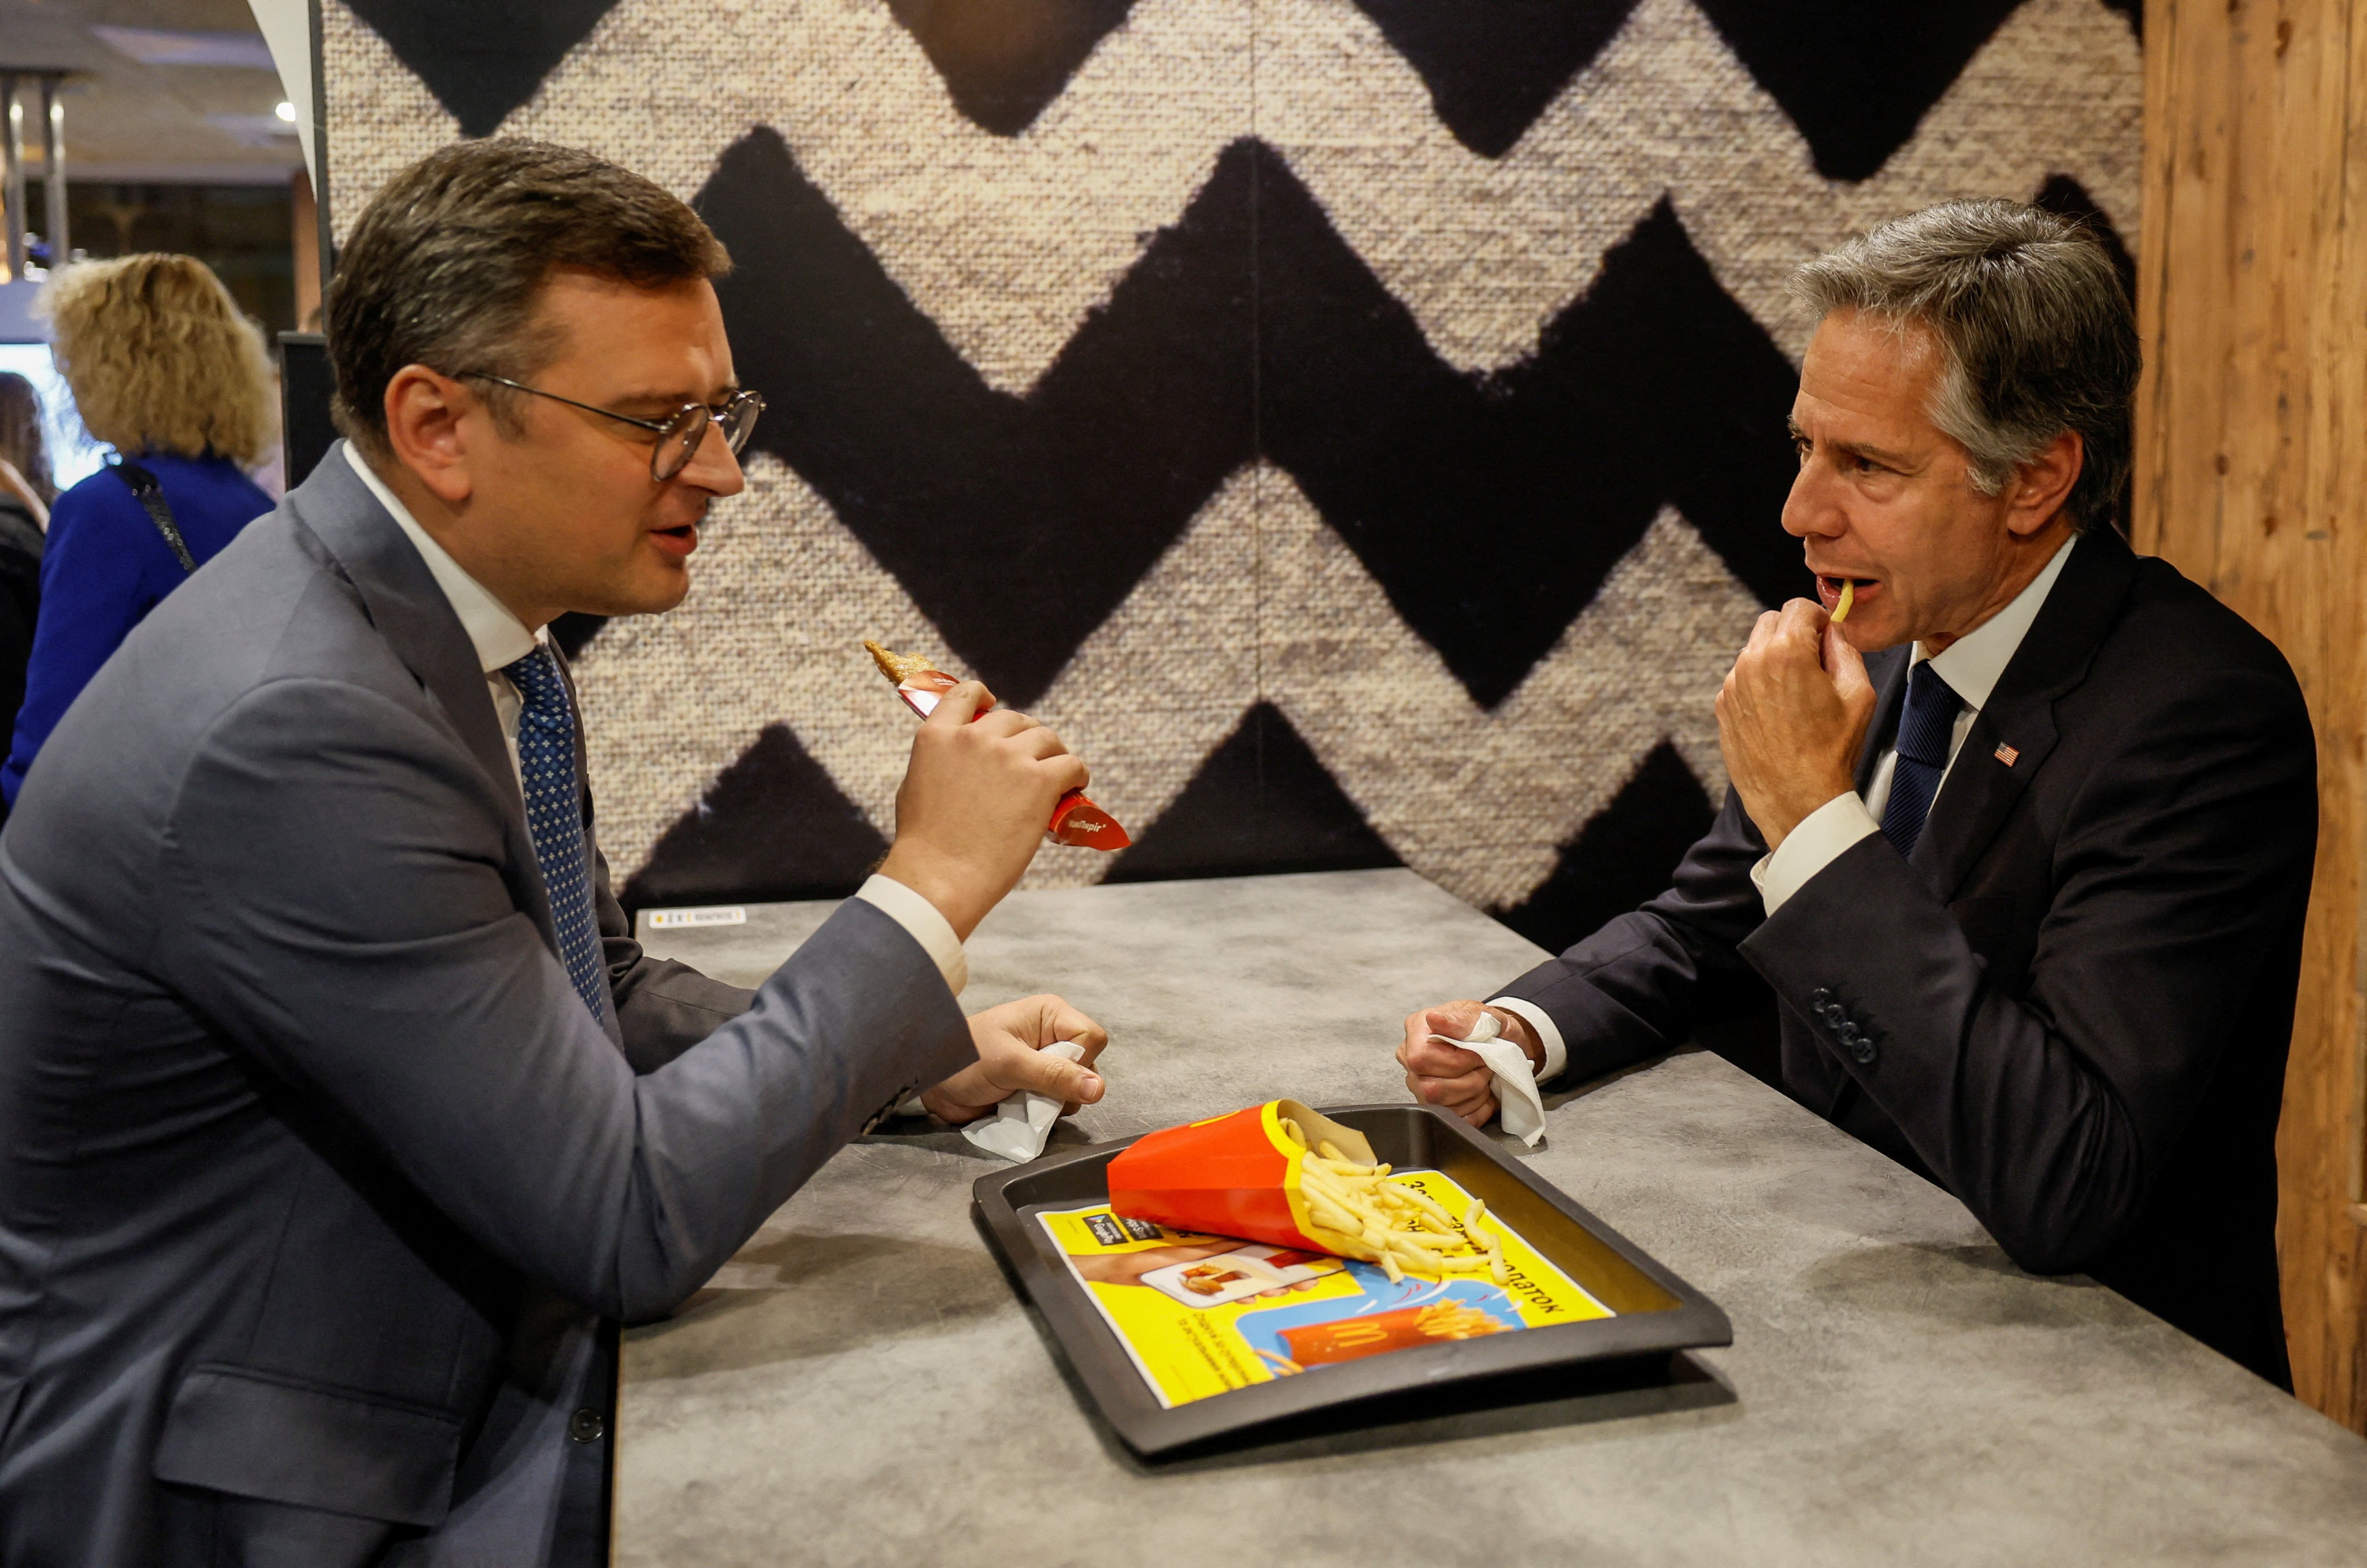 US Secretary of State Antony Blinken eats with Ukraine’s Foreign Minister Dmytro Kuleba at a McDonald’s in Kyiv. Photo: Reuters